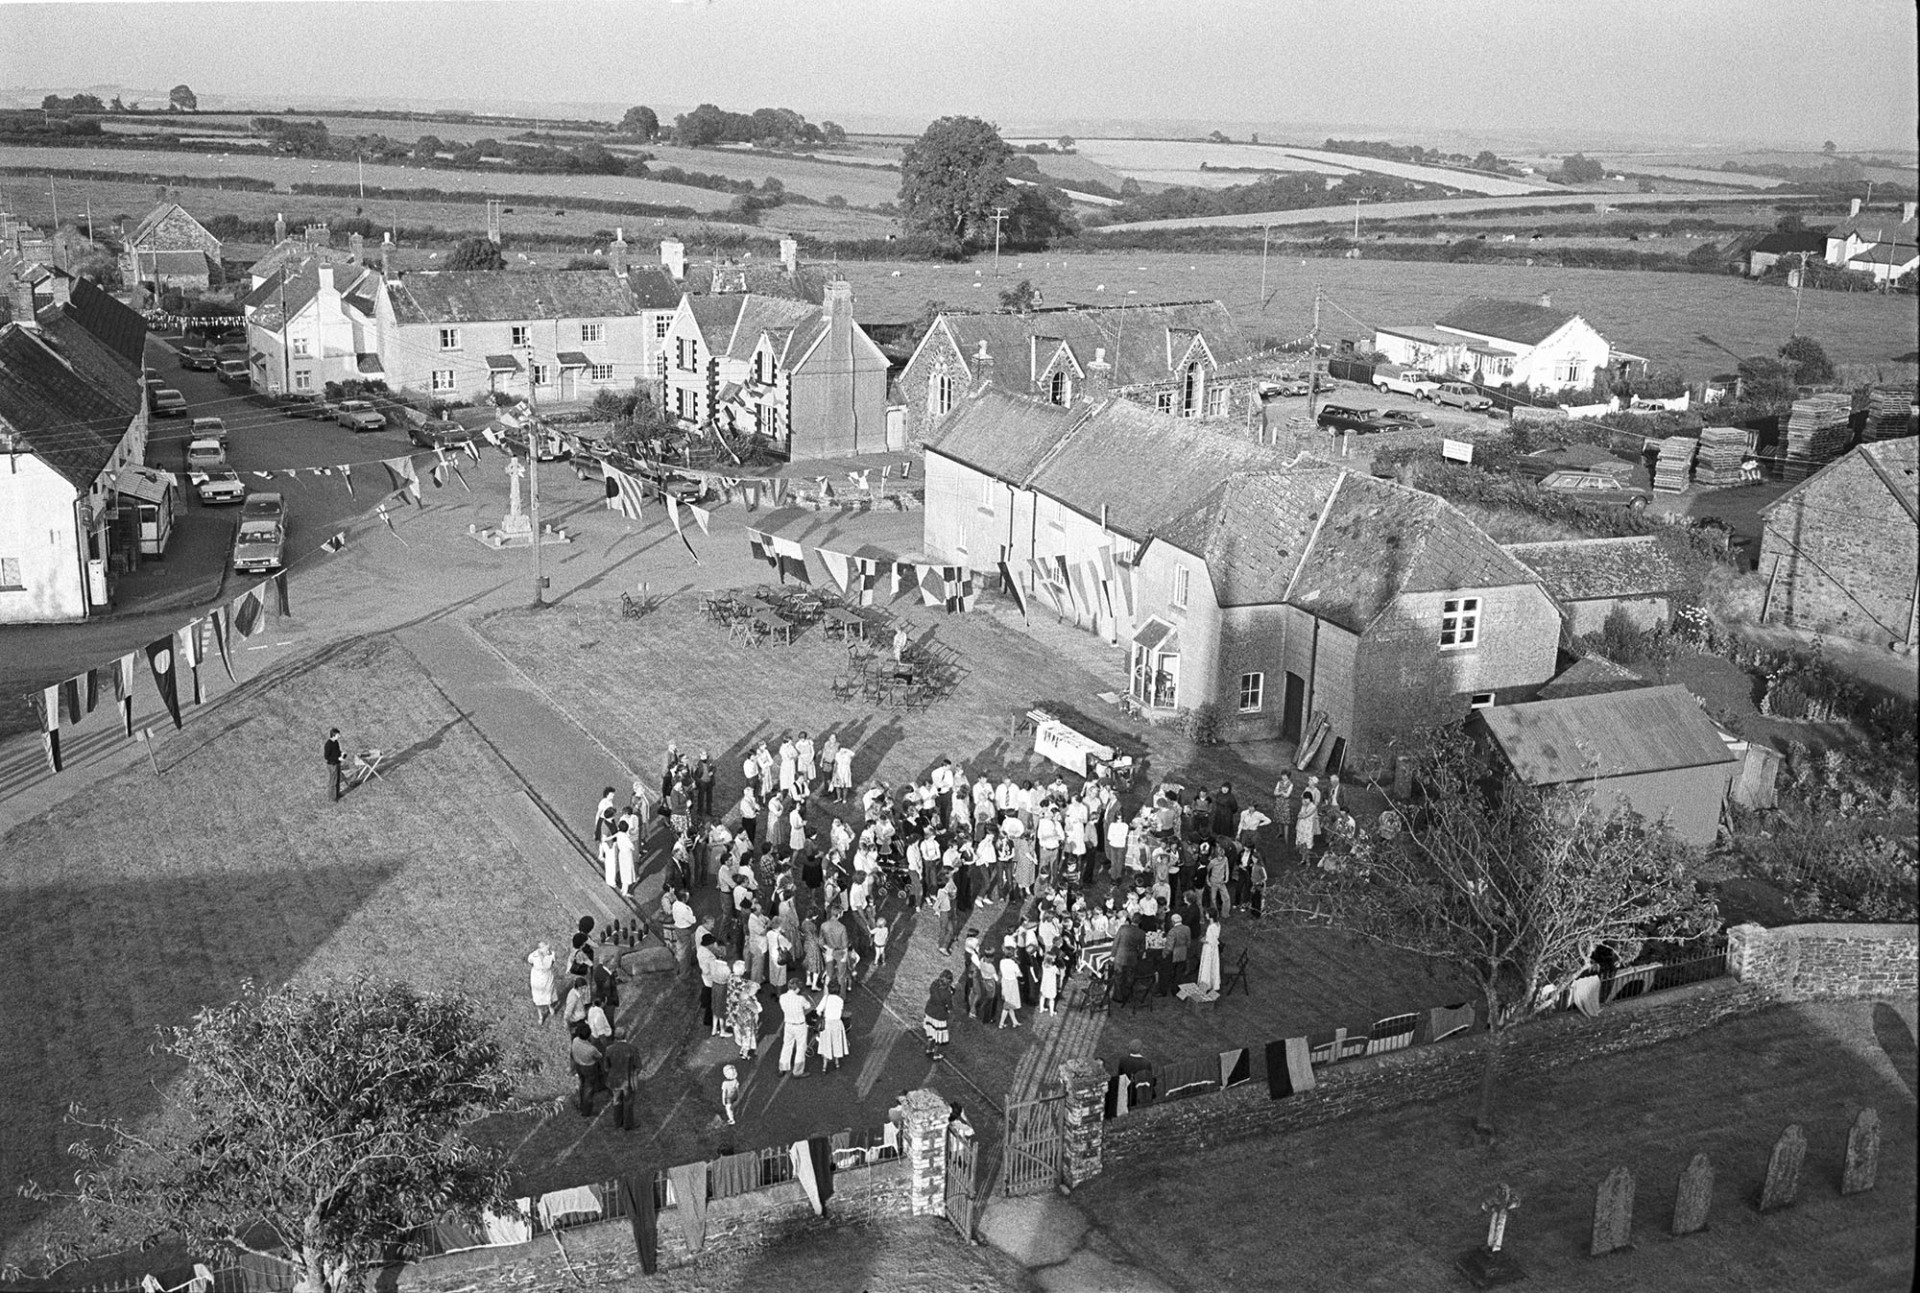 Royal Wedding. Assembling for presentation of commemorative mugs. View from church tower.
[A view taken from Ashreigney Church tower of people gathered on the green for the presentation of mugs for the Royal Wedding of Prince Charles and Lady Diana Spencer. A view of the village decorated with flags and bunting is visible behind the crowd.]